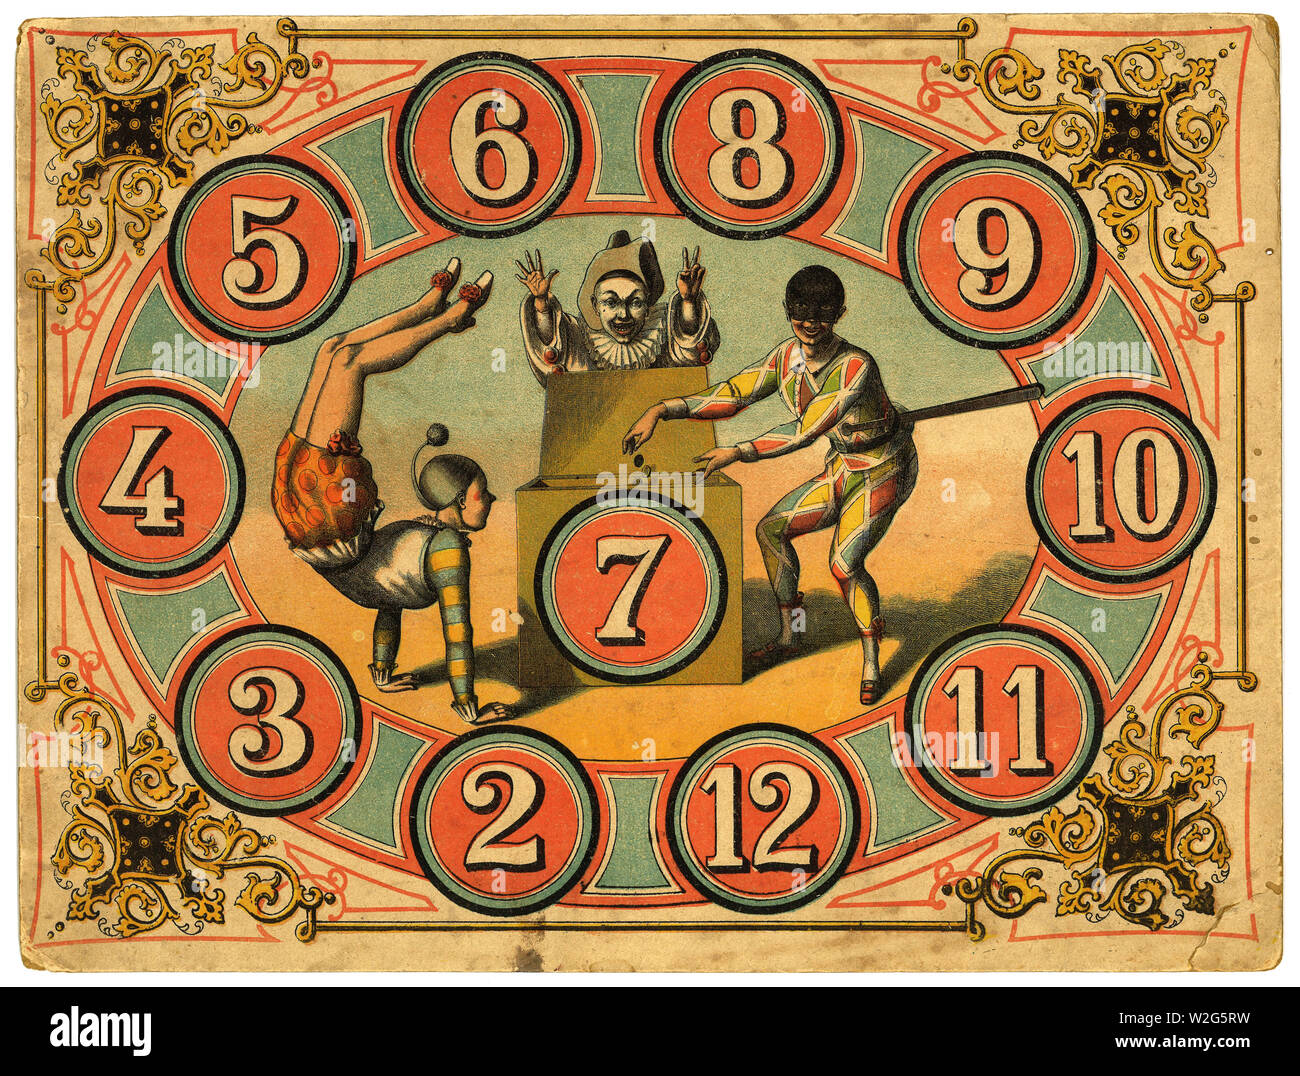 Historical circus board game from Netherlands ca. late 19th century or early 20th century Stock Photo